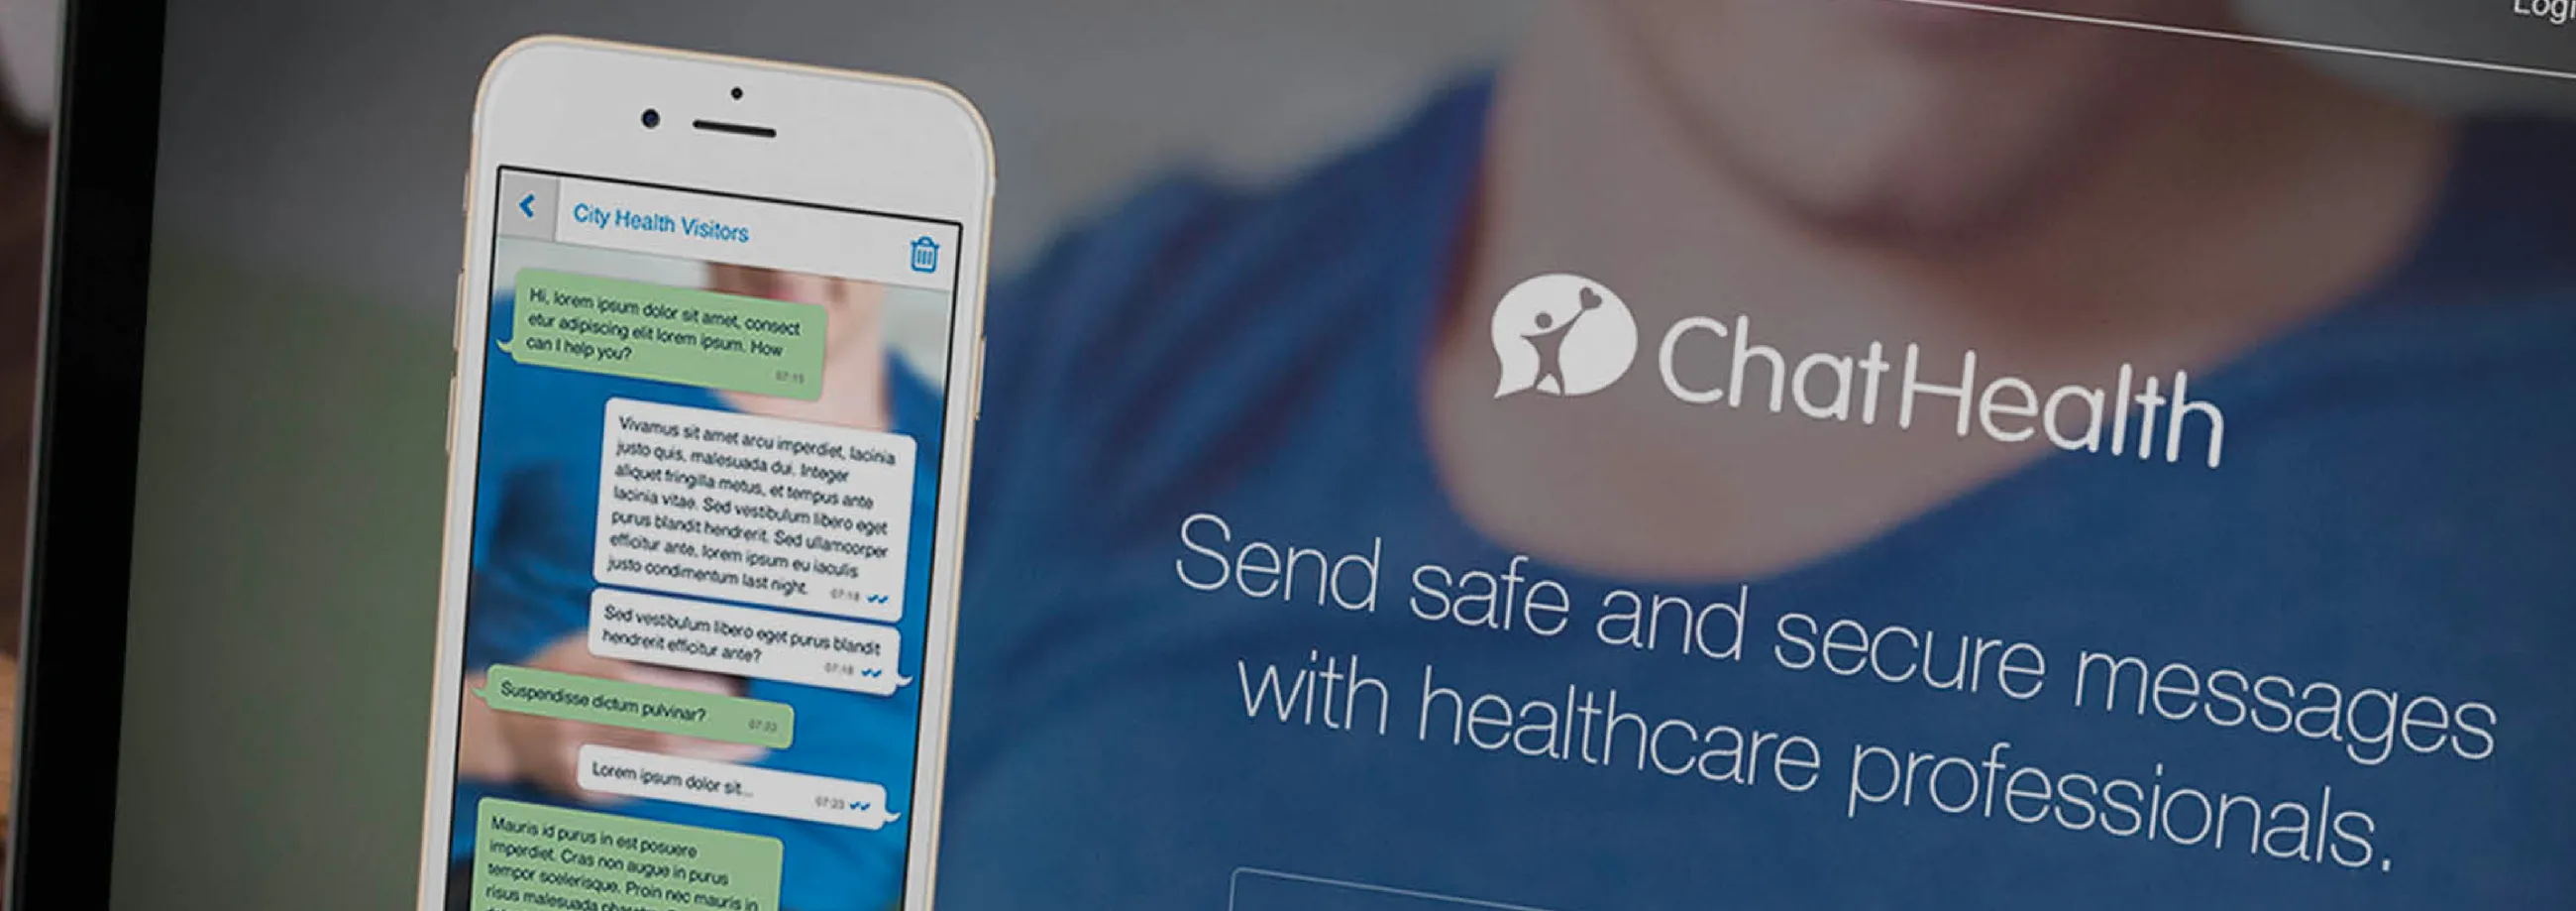 ChatHealth app and website